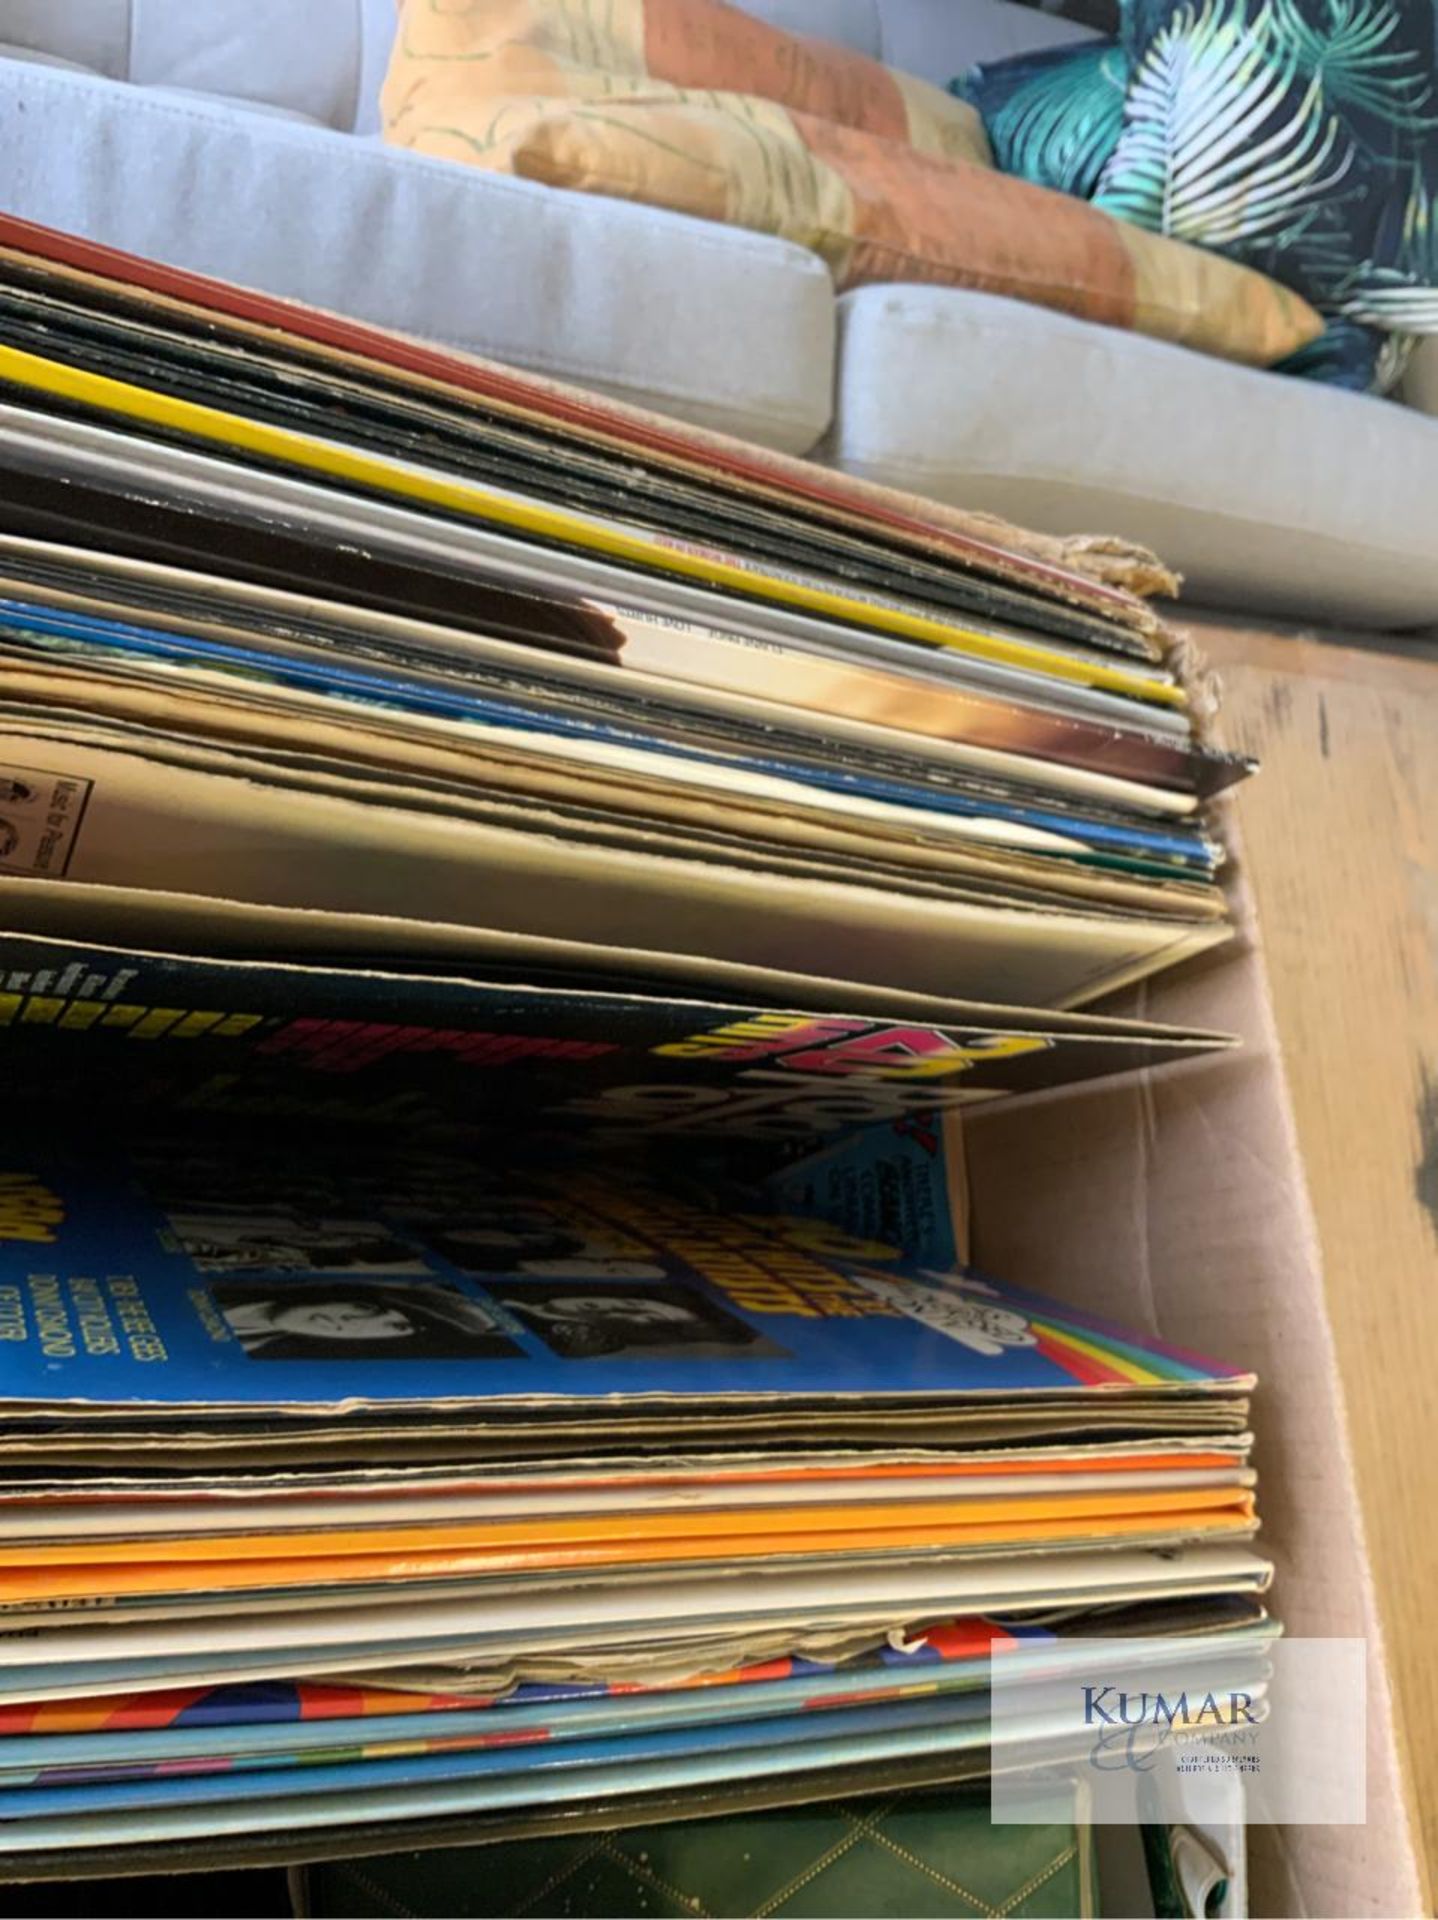 Large Collection of Vintage And Aged Vinyl Records, Books, Literature As Shown - Image 17 of 18